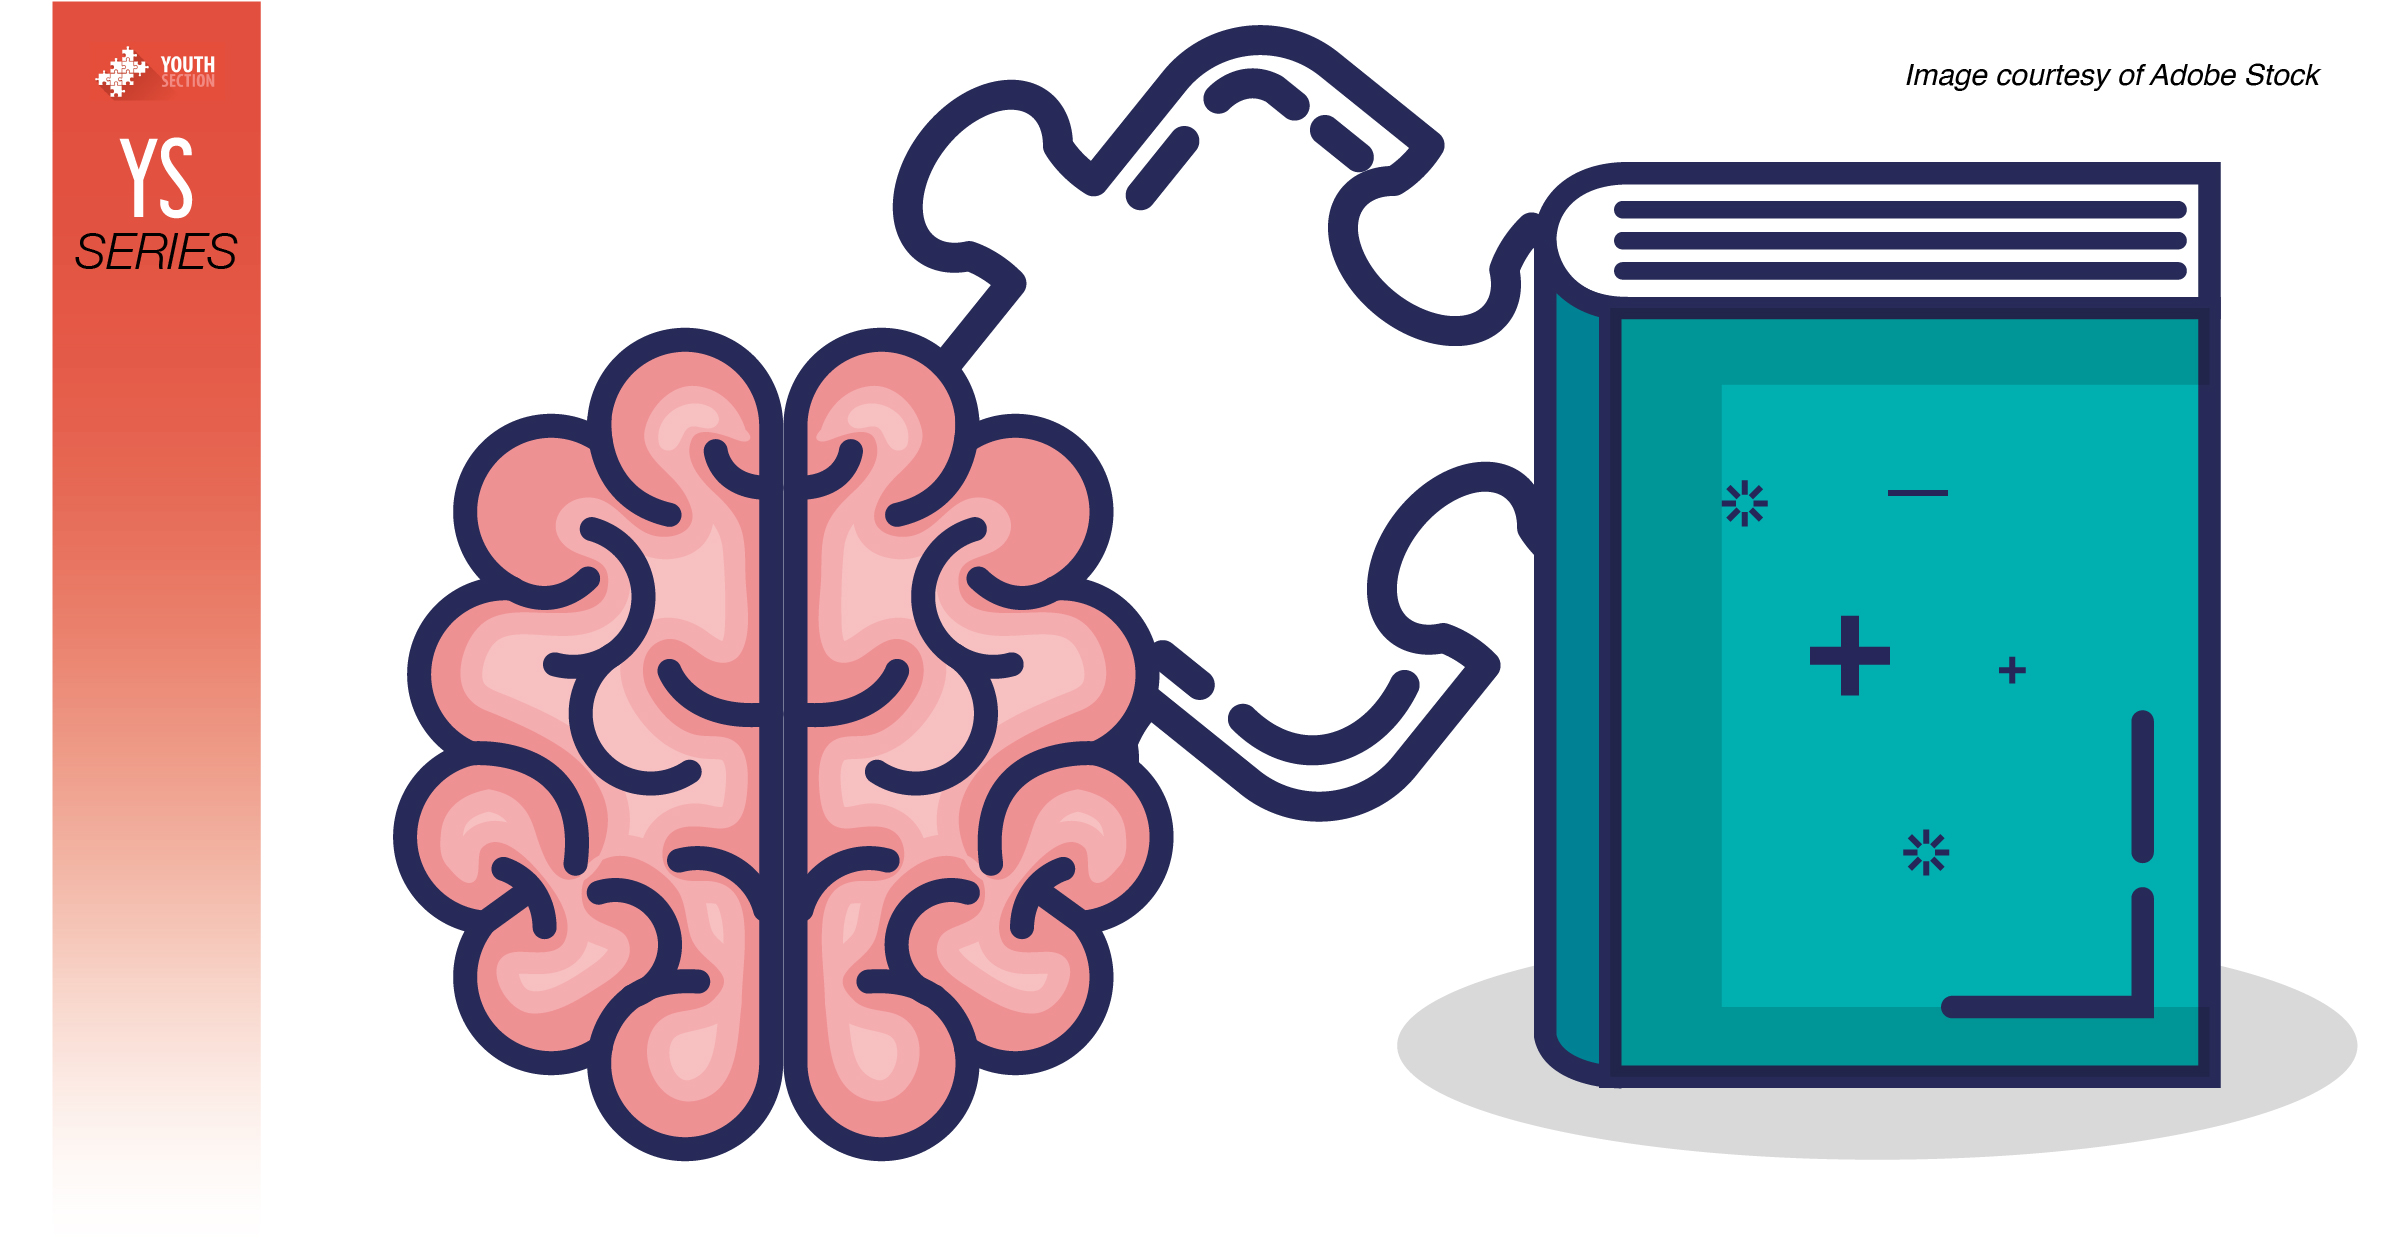 Vector illustration with a book, brain, and a puzzle piece.